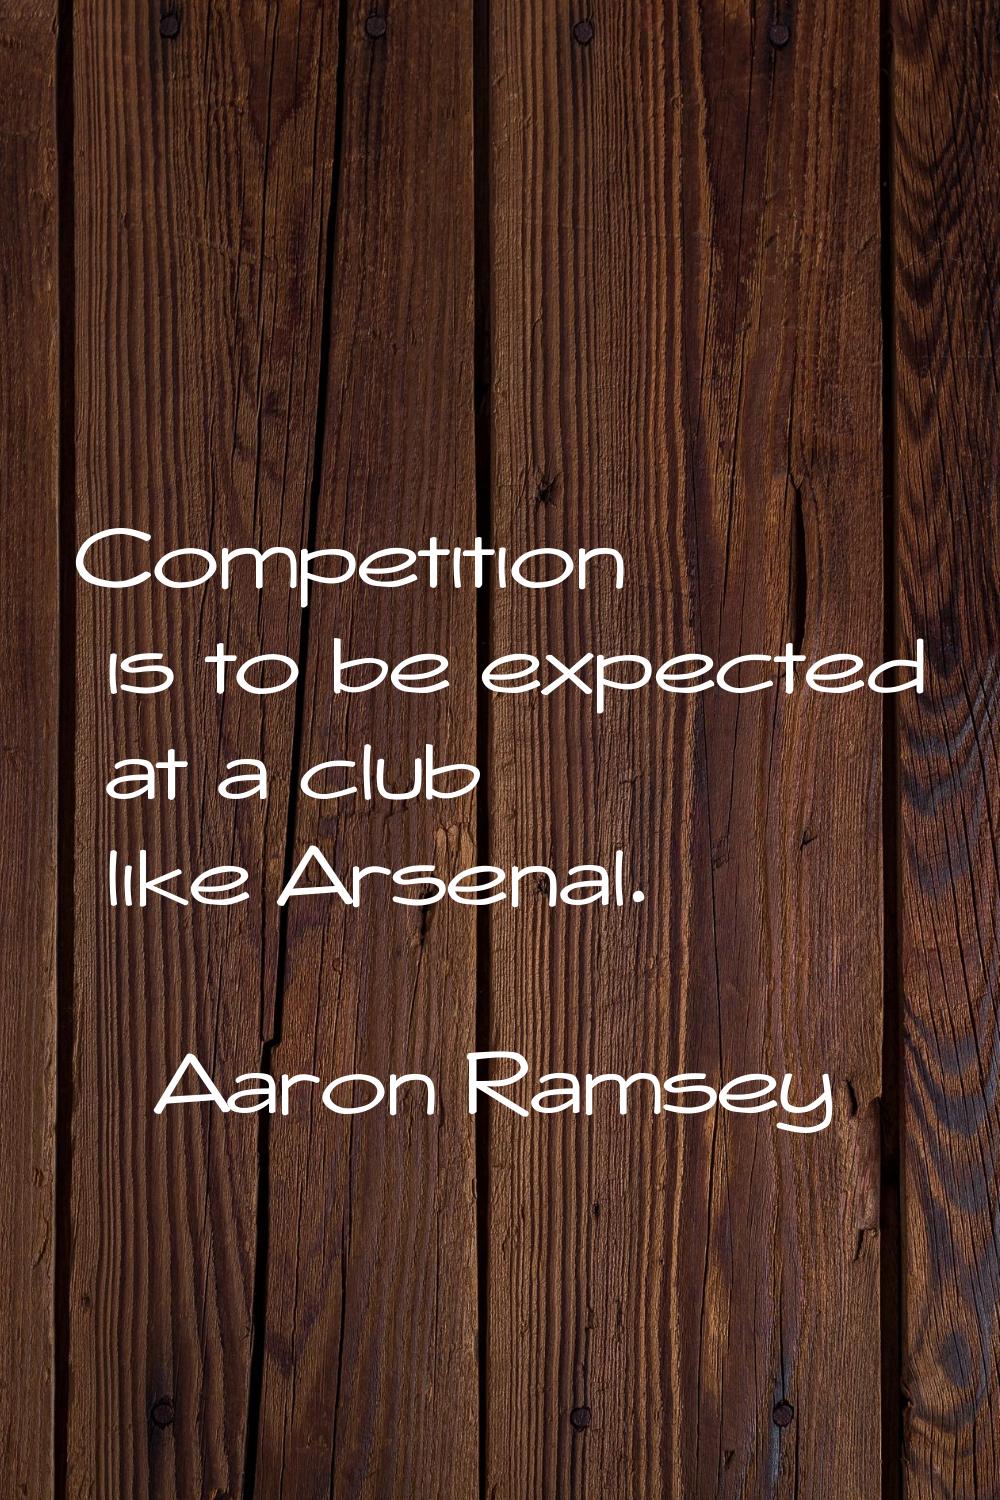 Competition is to be expected at a club like Arsenal.